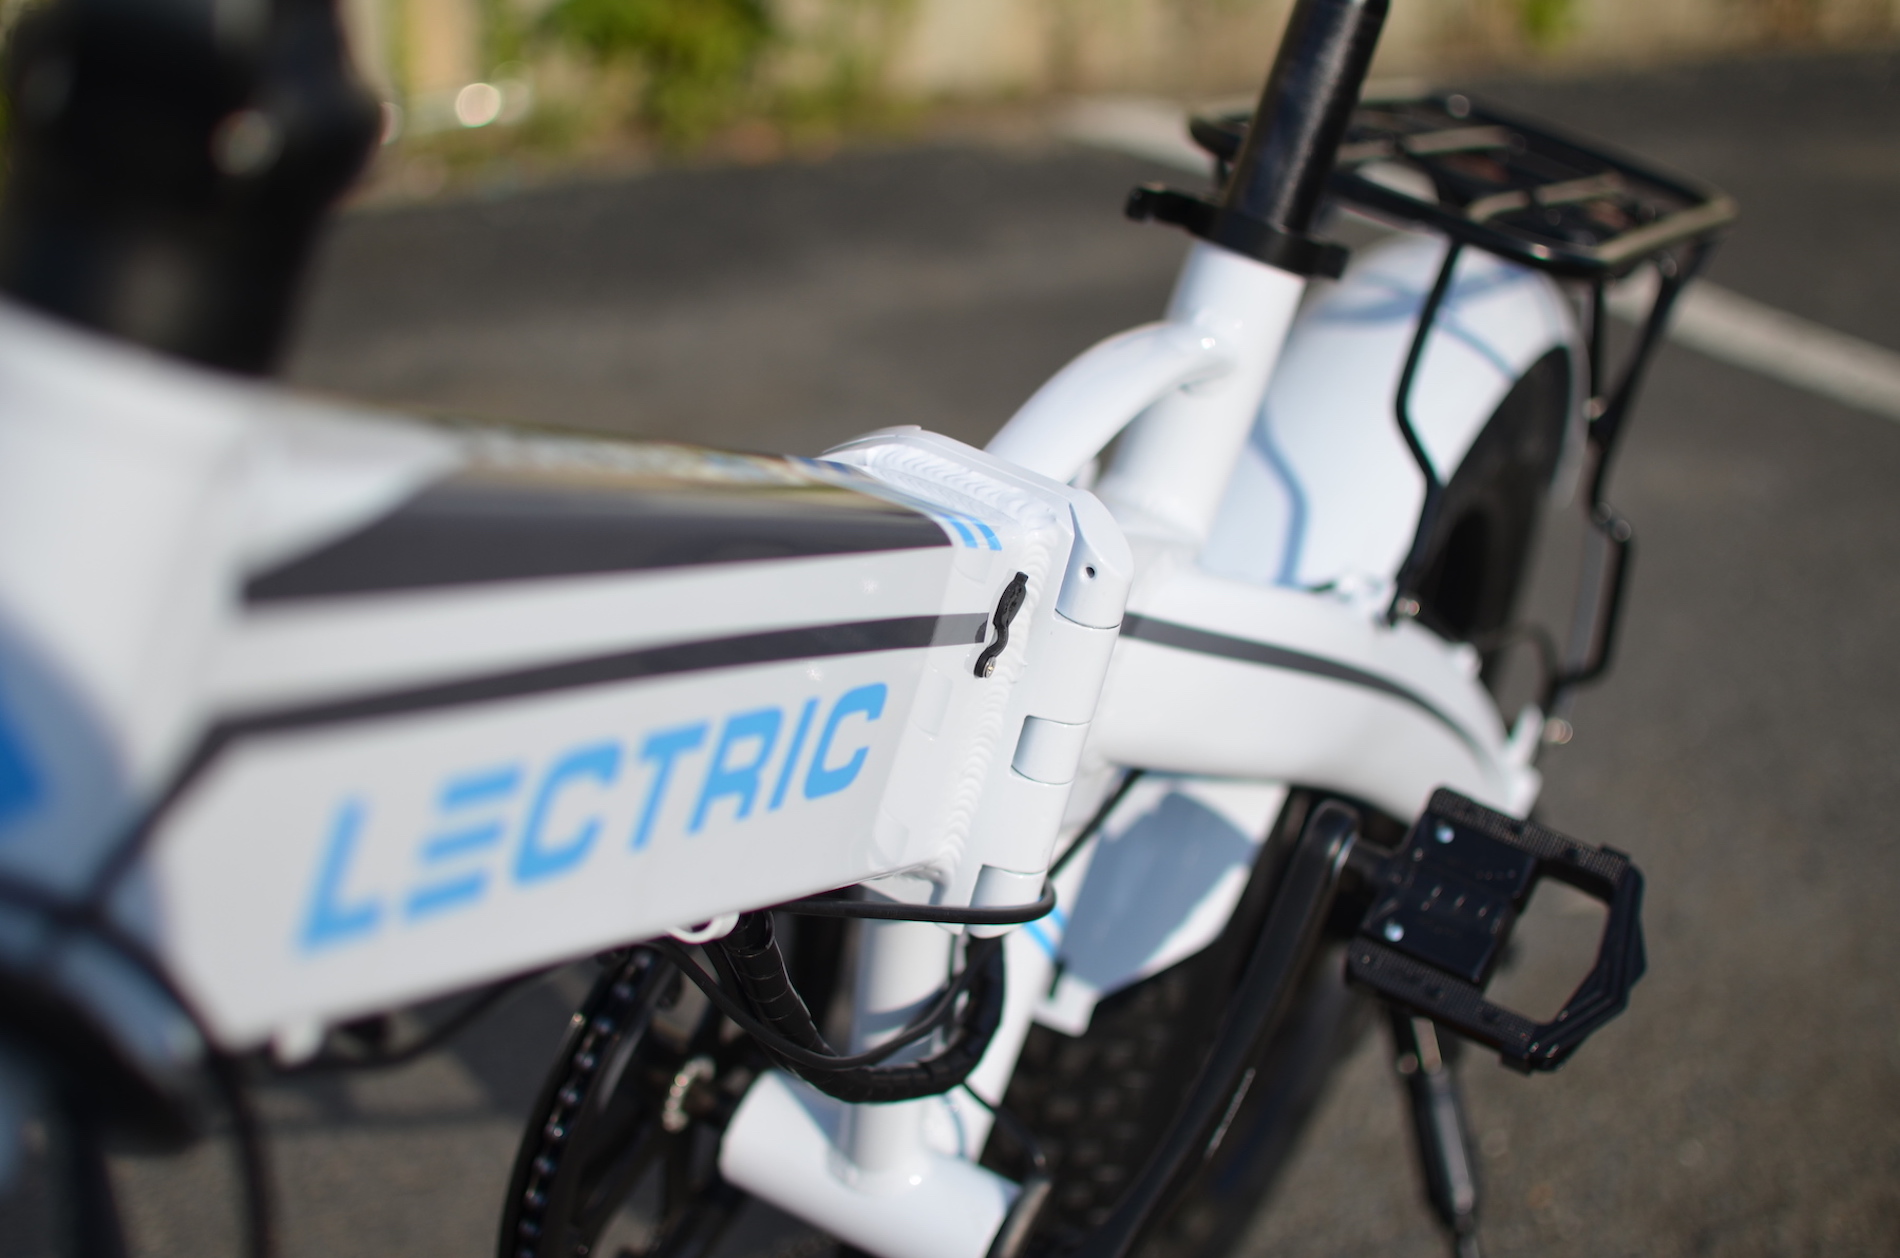 lectric xp bike for sale